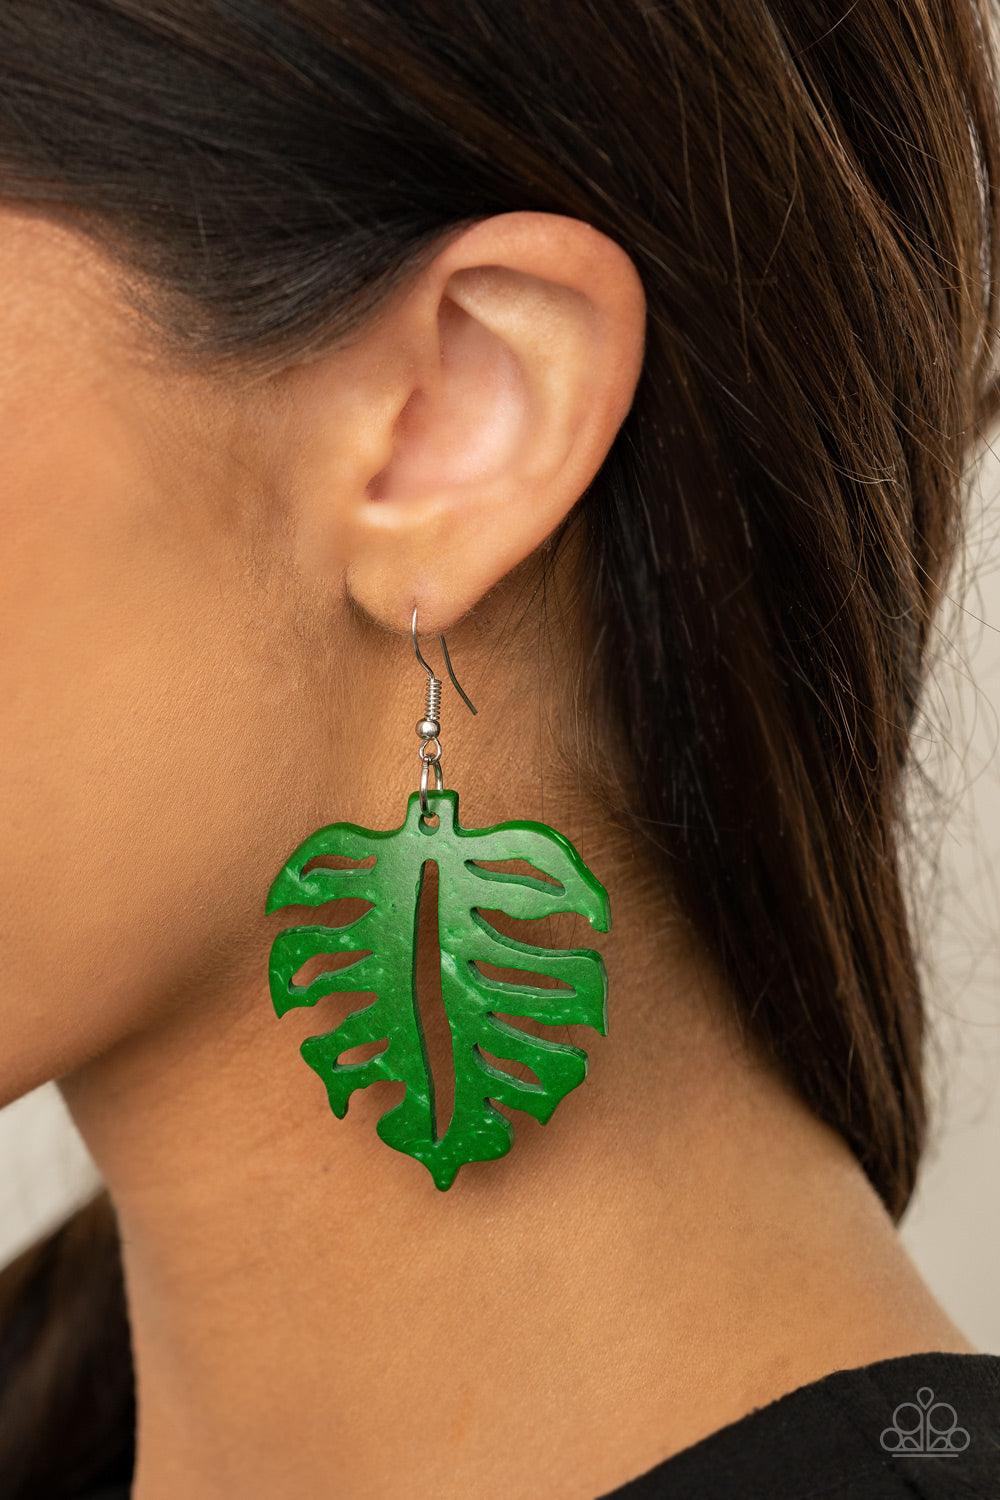 Paparazzi Accessories Shake Your PALMS PALMS - Green Painted in a distressed green finish, an airy palm leaf frame swings from the ear for a colorfully seasonal look. Earring attaches to a standard fishhook fitting. Sold as one pair of earrings. Jewelry